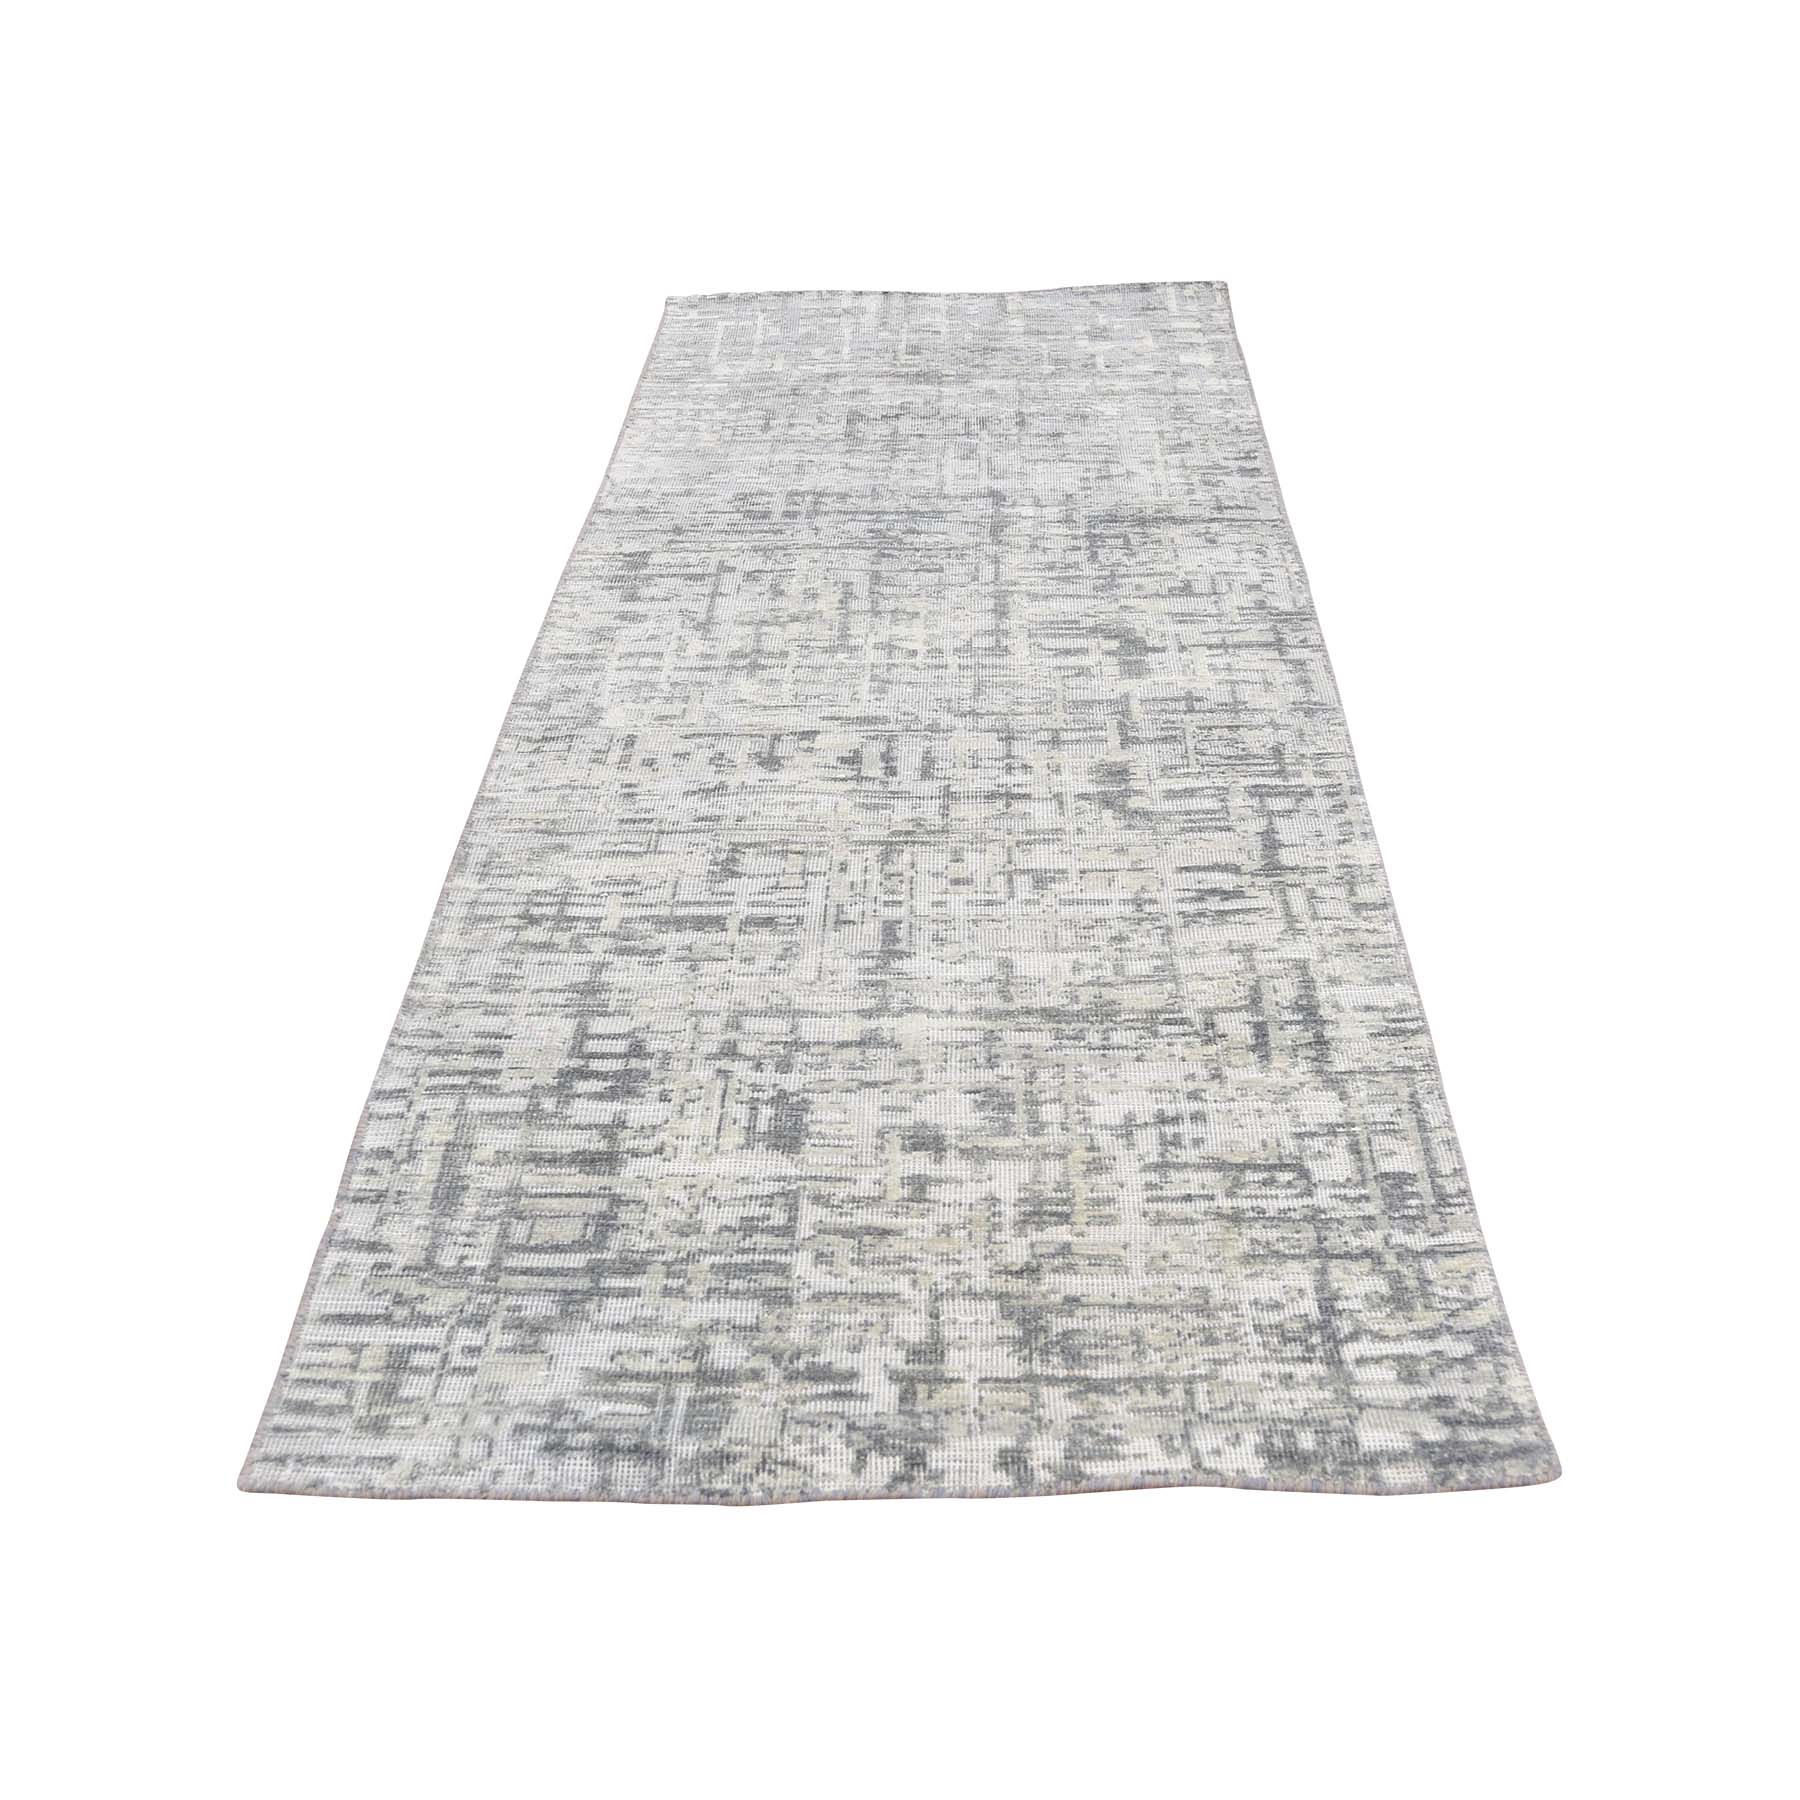 2'6"x8'1" THE MATRIX Pure Silk with Textured Wool Tone on Tone Hand Woven Rug 